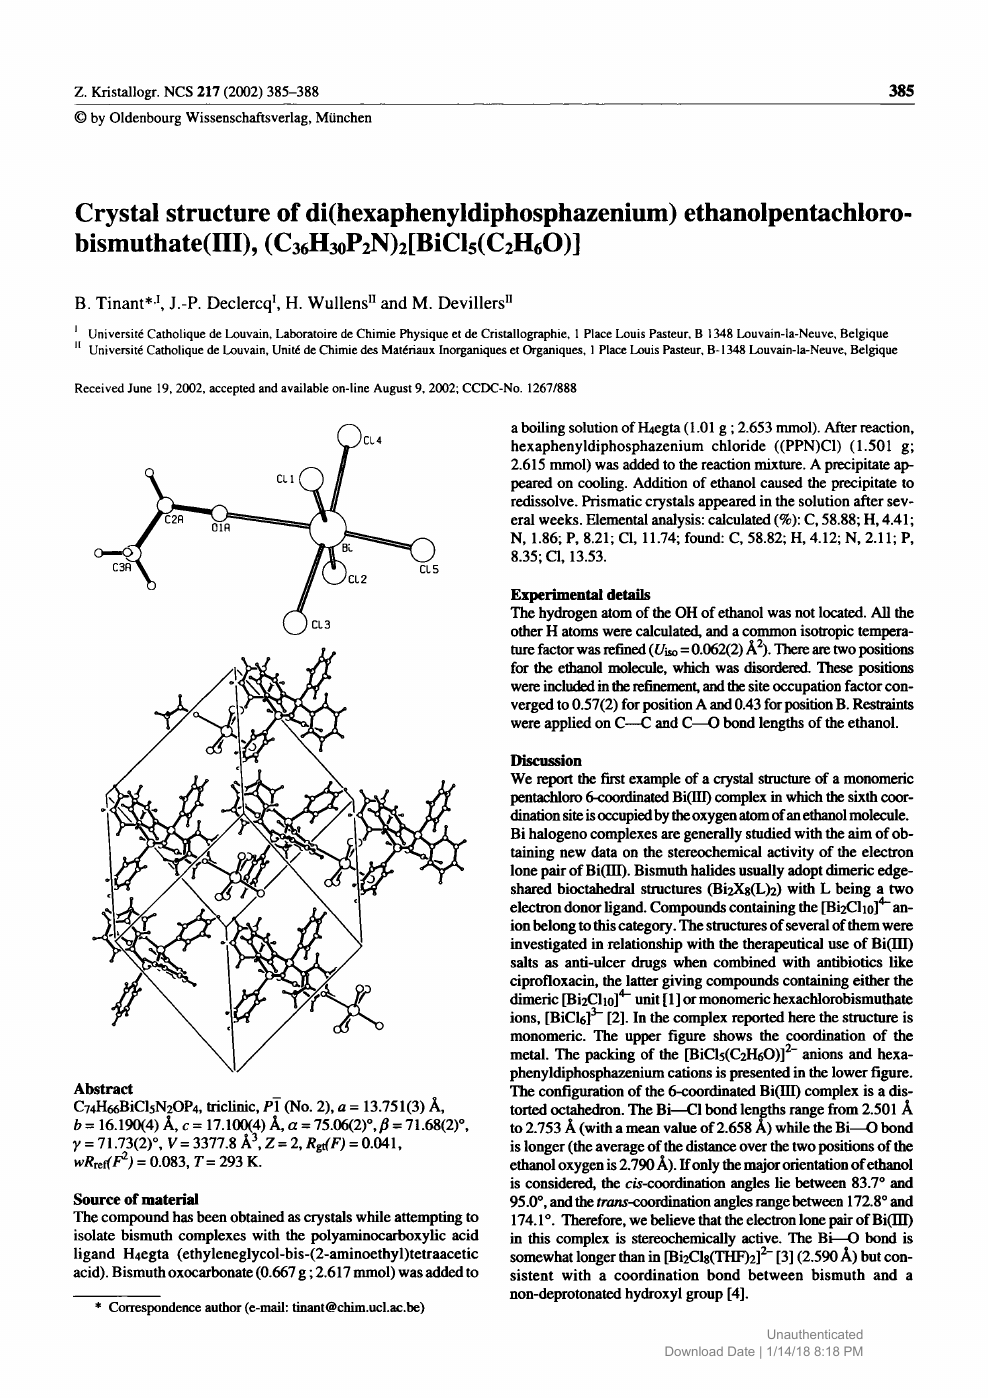 Crystal Structure Of Di Hexaphenyldiphosphazenium Ethanolpentachlorobismuthate Iii C36h30p2n 2 Bicl5 C2h6o Topic Of Research Paper In Biological Sciences Download Scholarly Article Pdf And Read For Free On Cyberleninka Open Science Hub